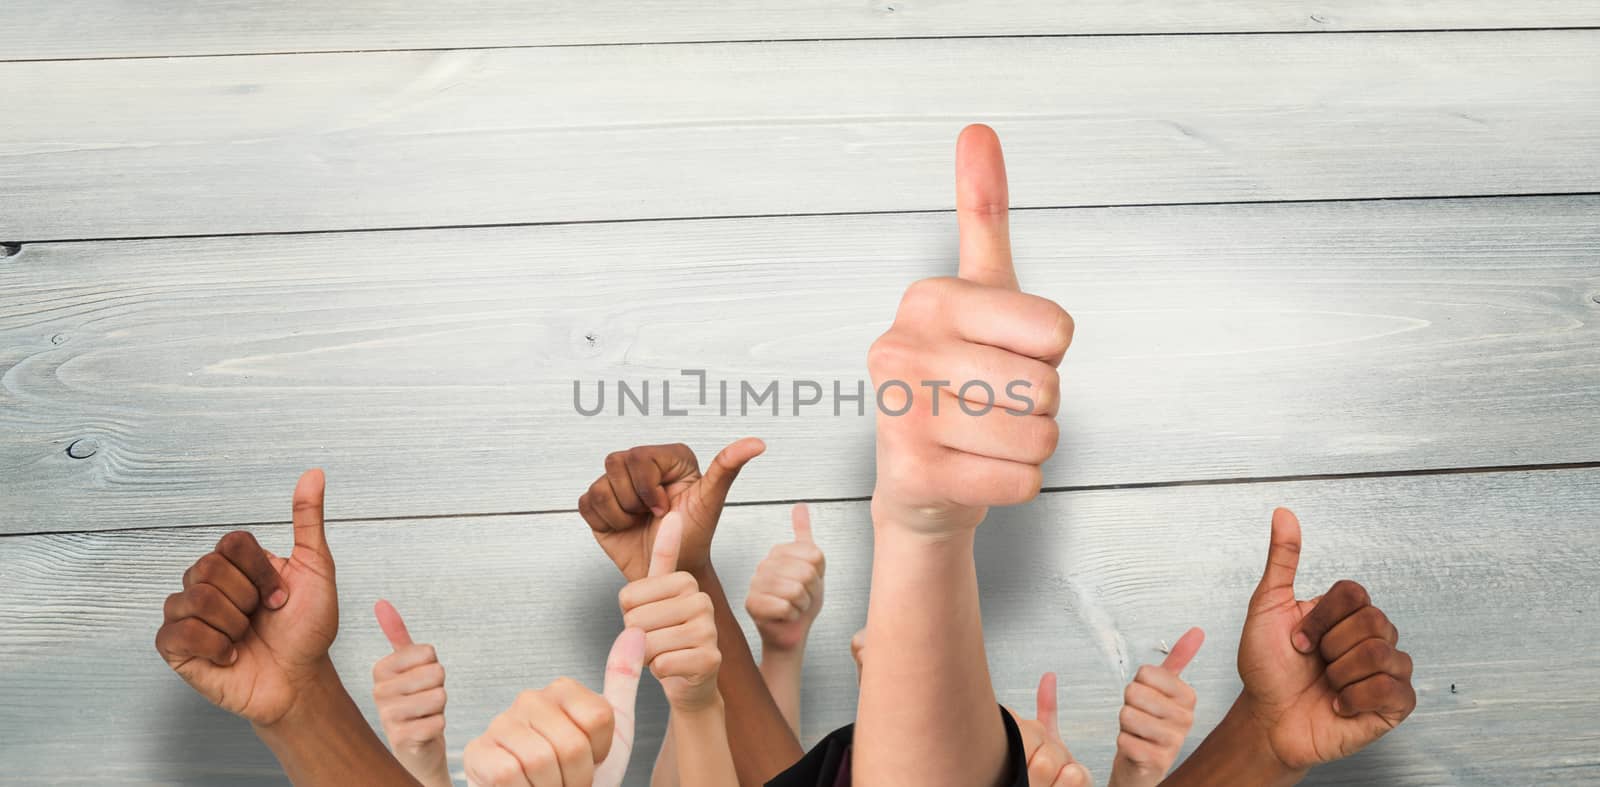 Hands showing thumbs up against bleached wooden planks background